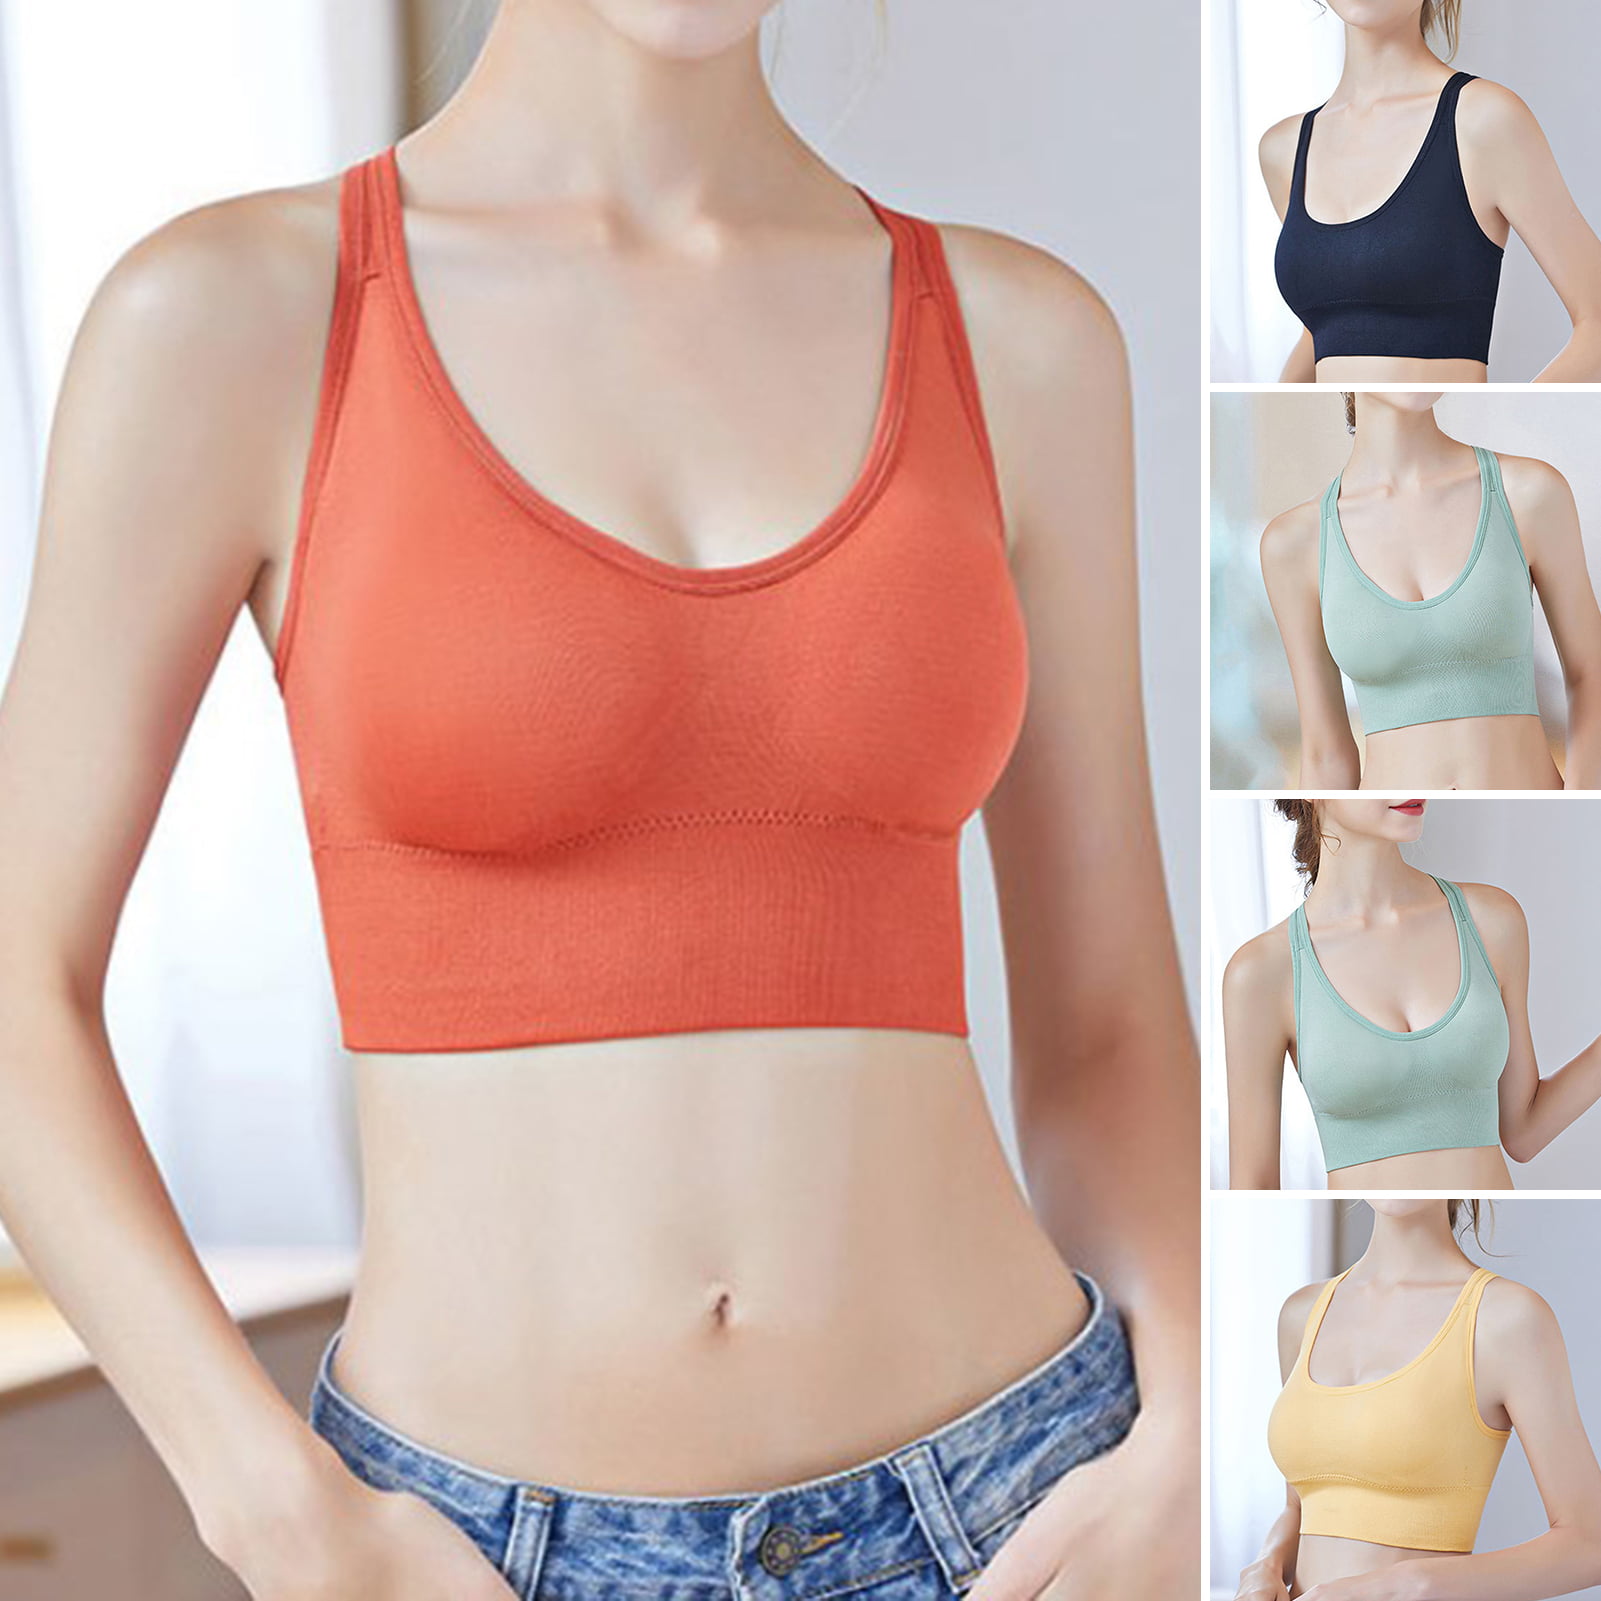 Honrane Sports Bra Solid Color Breathable Stretchy Padded Intimacy